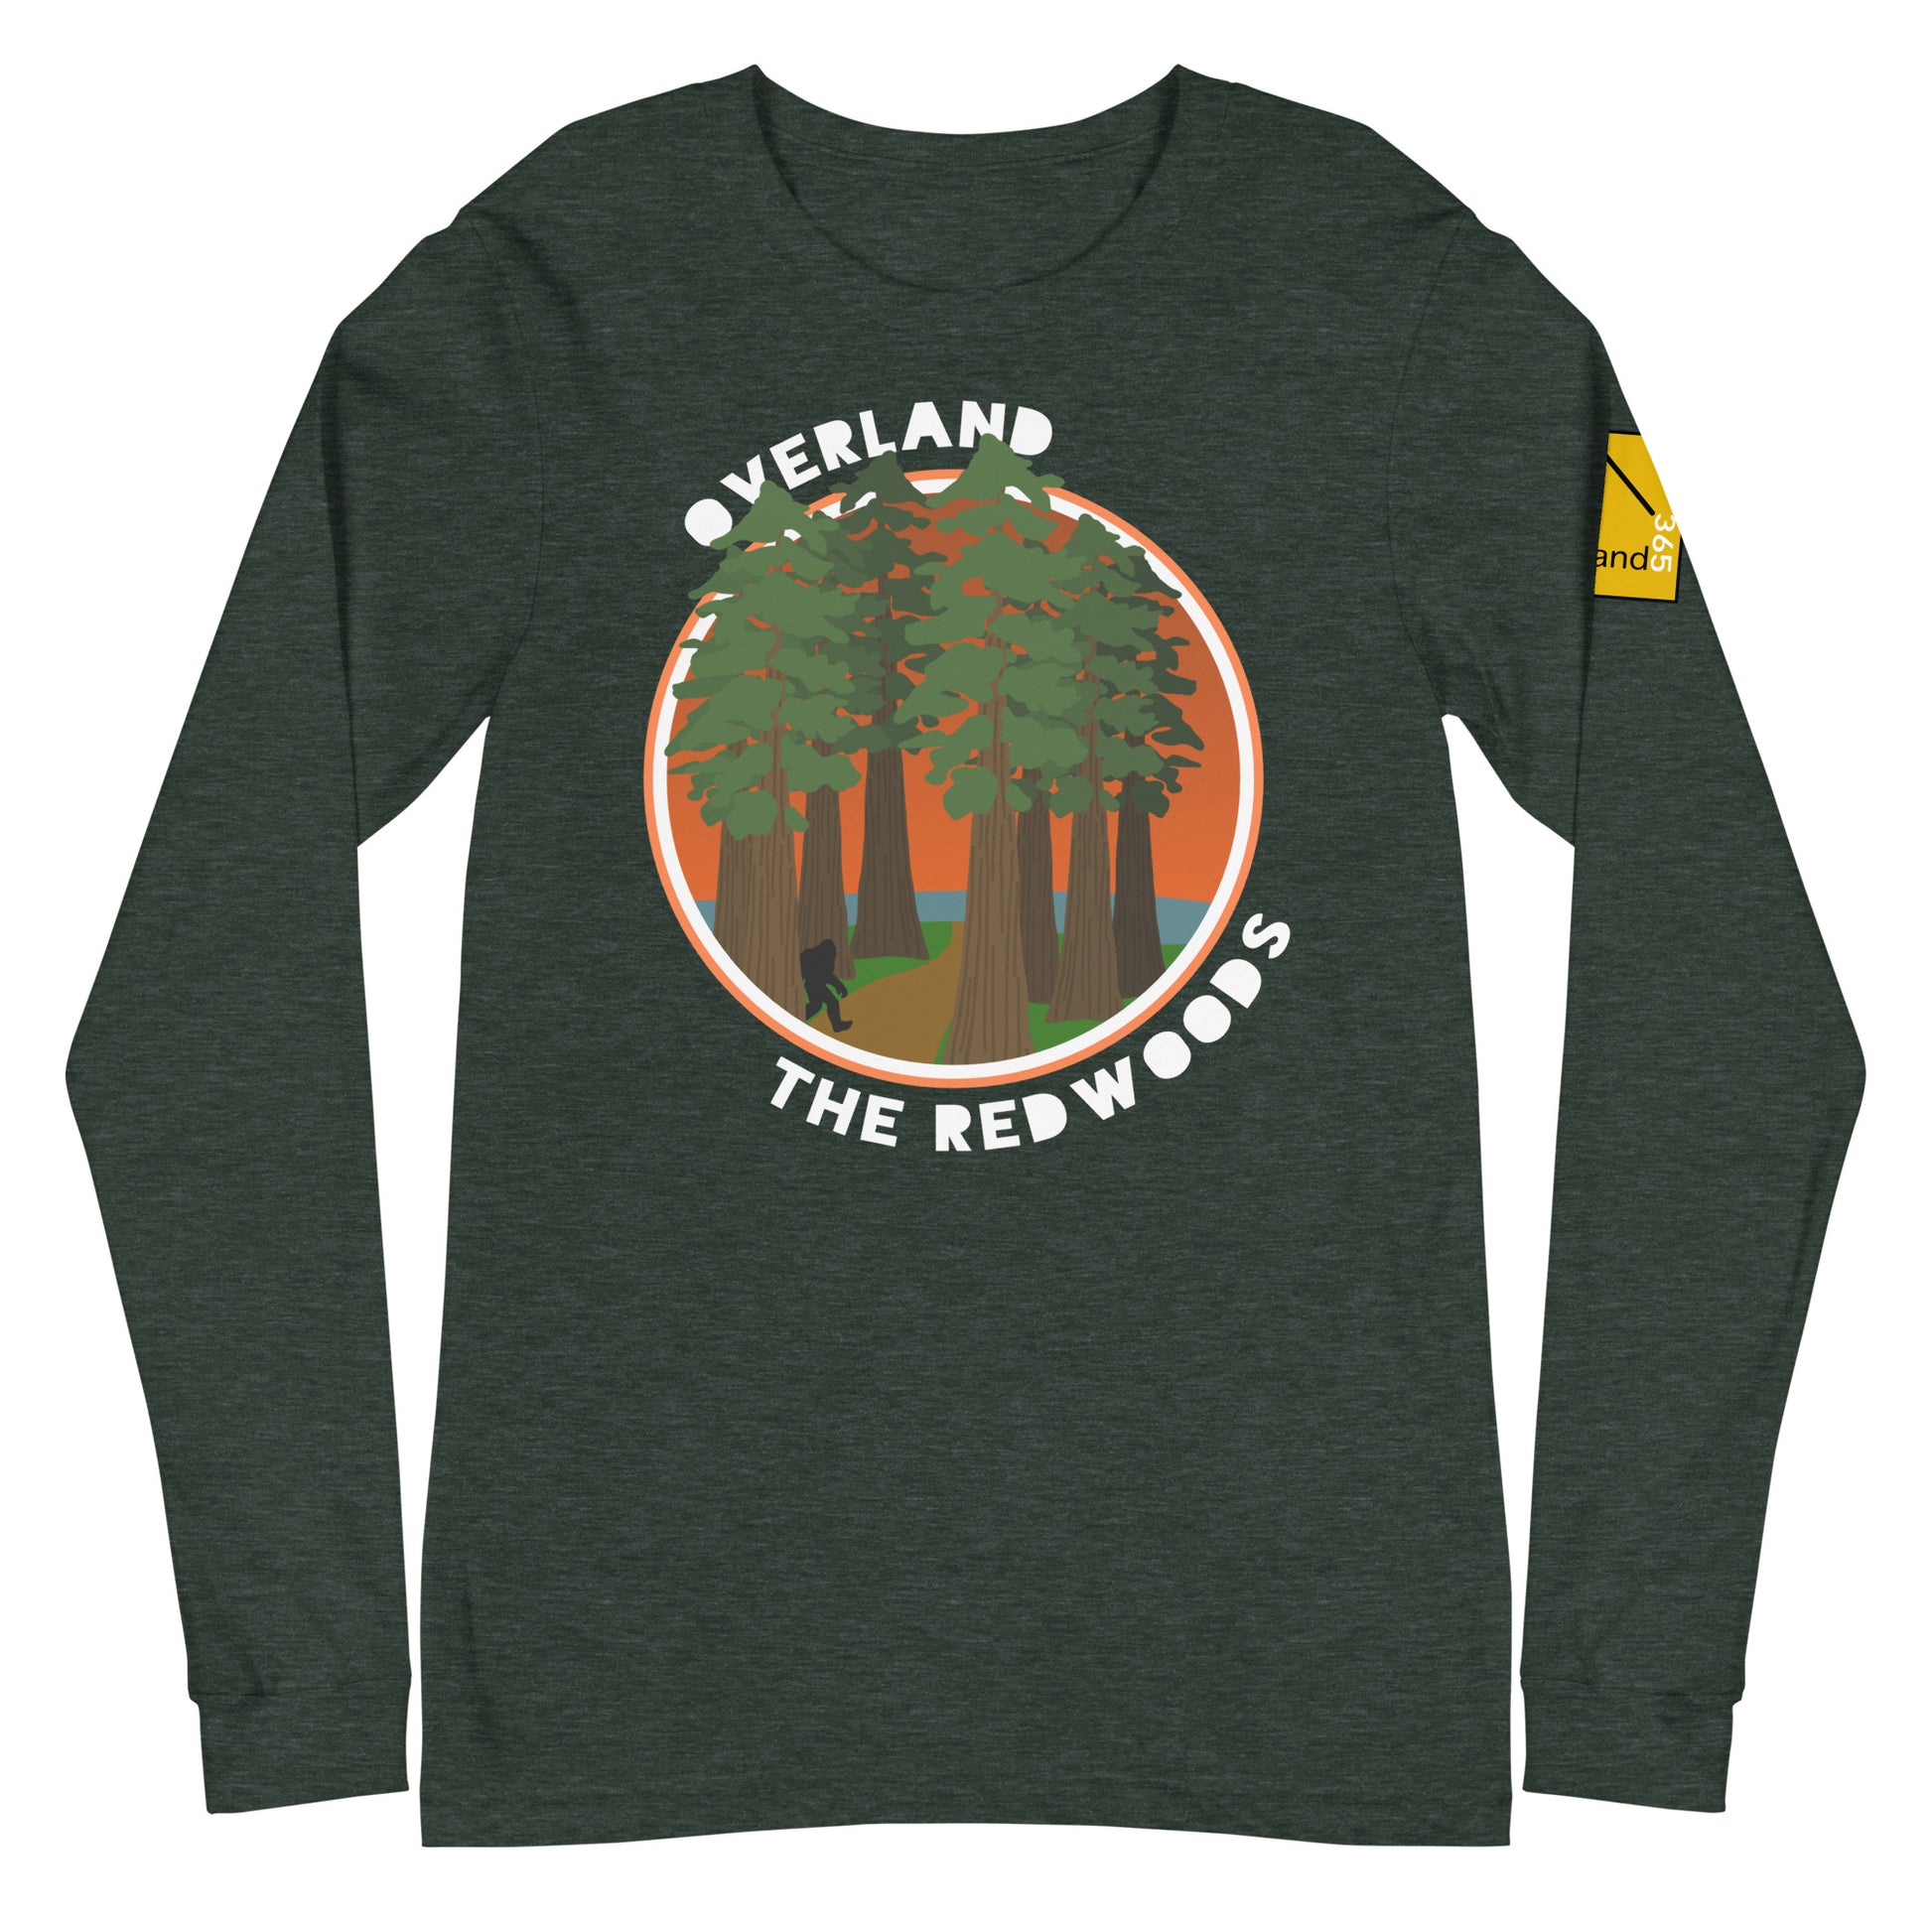 Overland the Redwoods. Bigfoot country. Forest Green long-sleeve. overland365.com